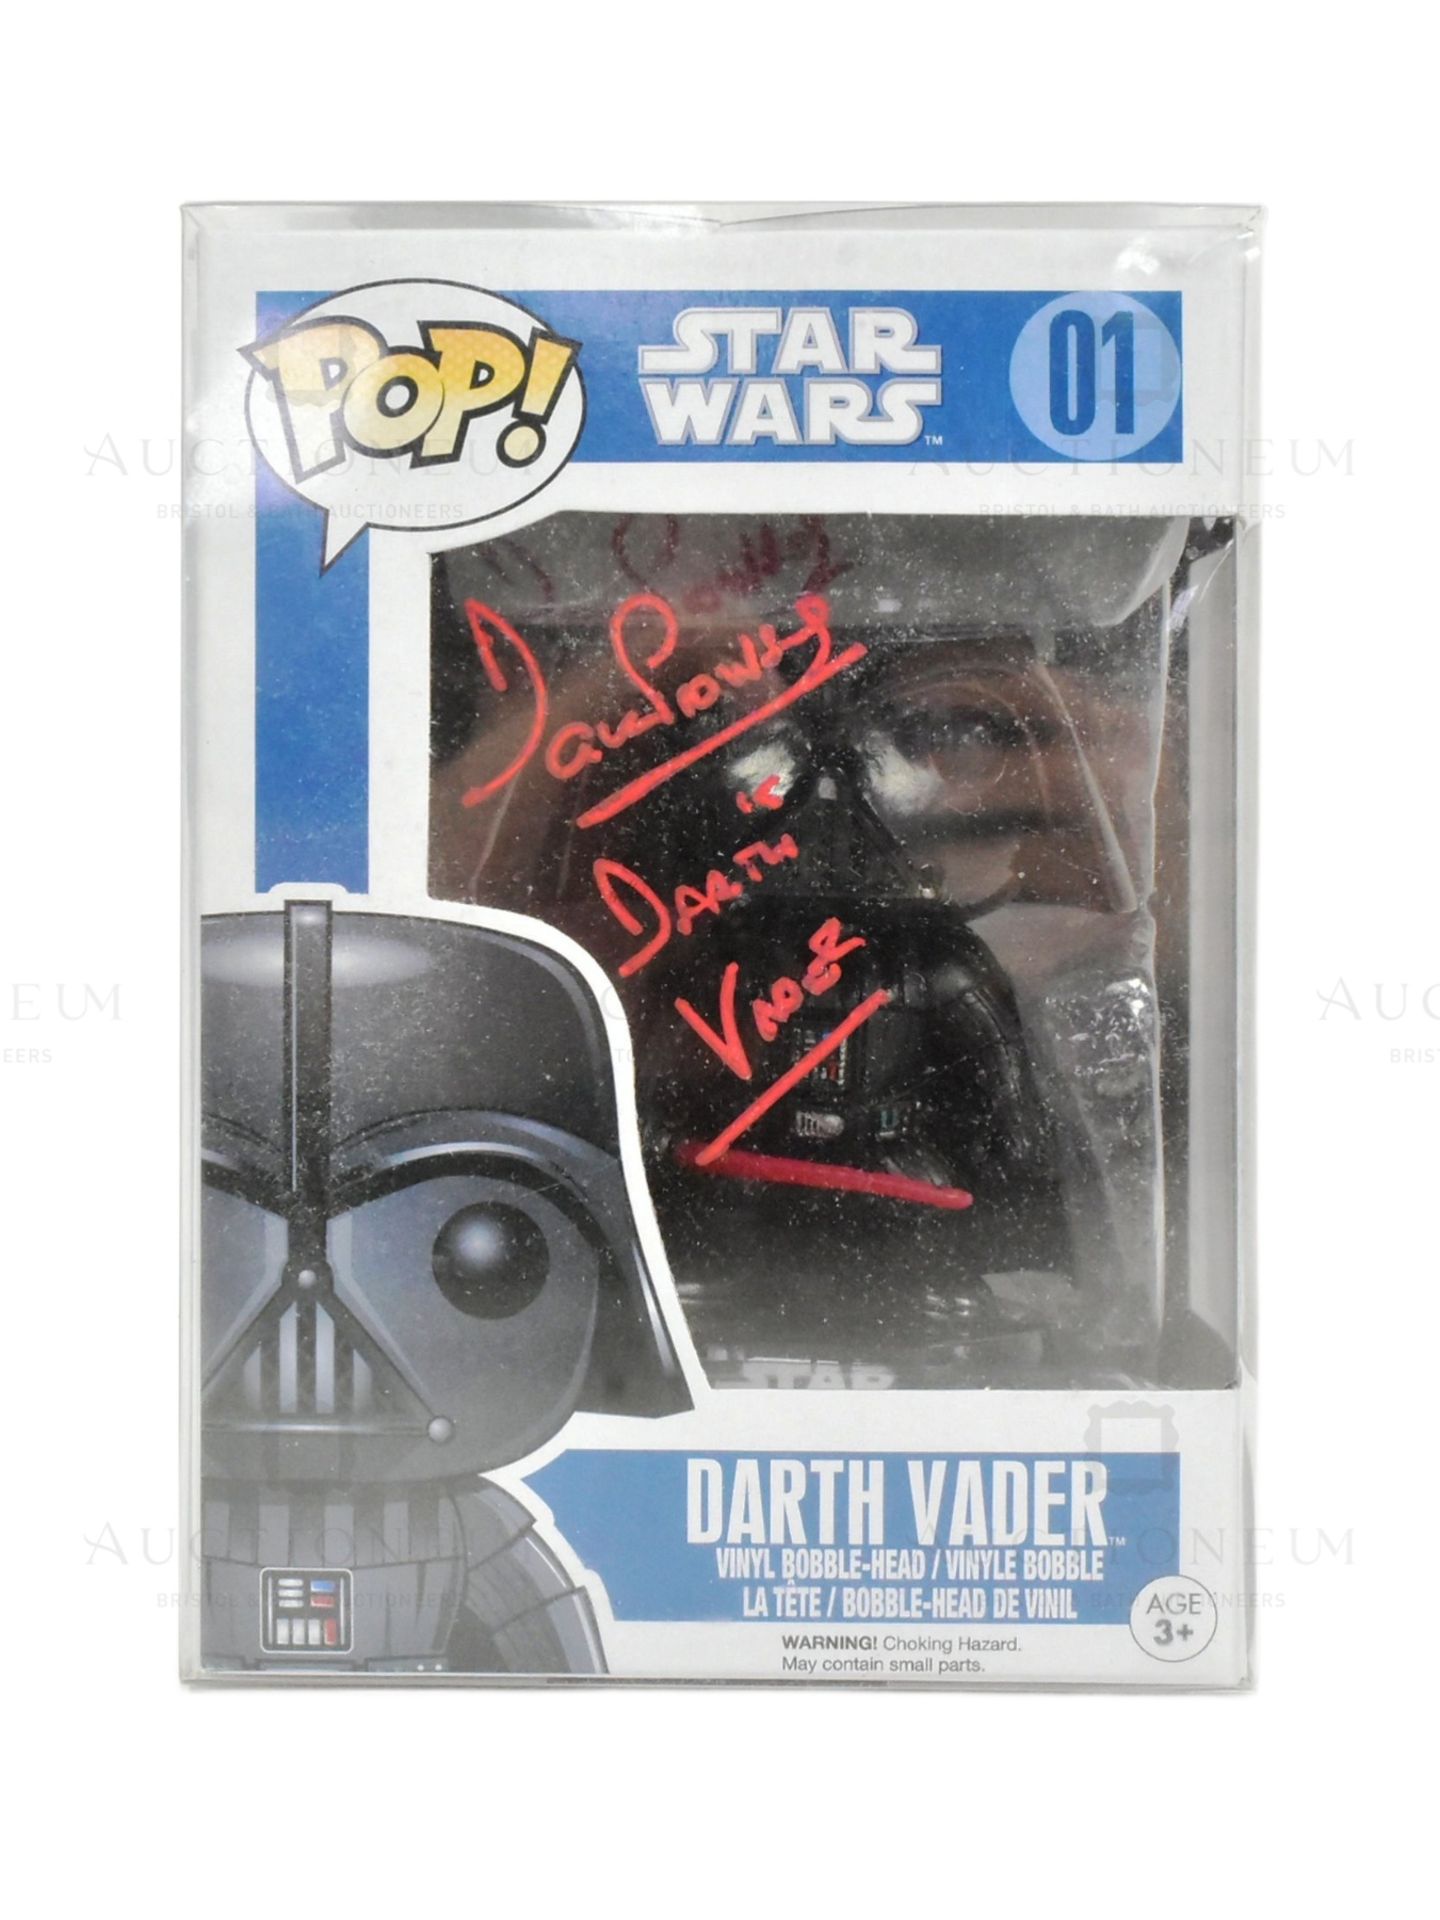 STAR WARS - DAVE PROWSE (1935-2020) - SIGNED FUNKO POP ACTION FIGURE